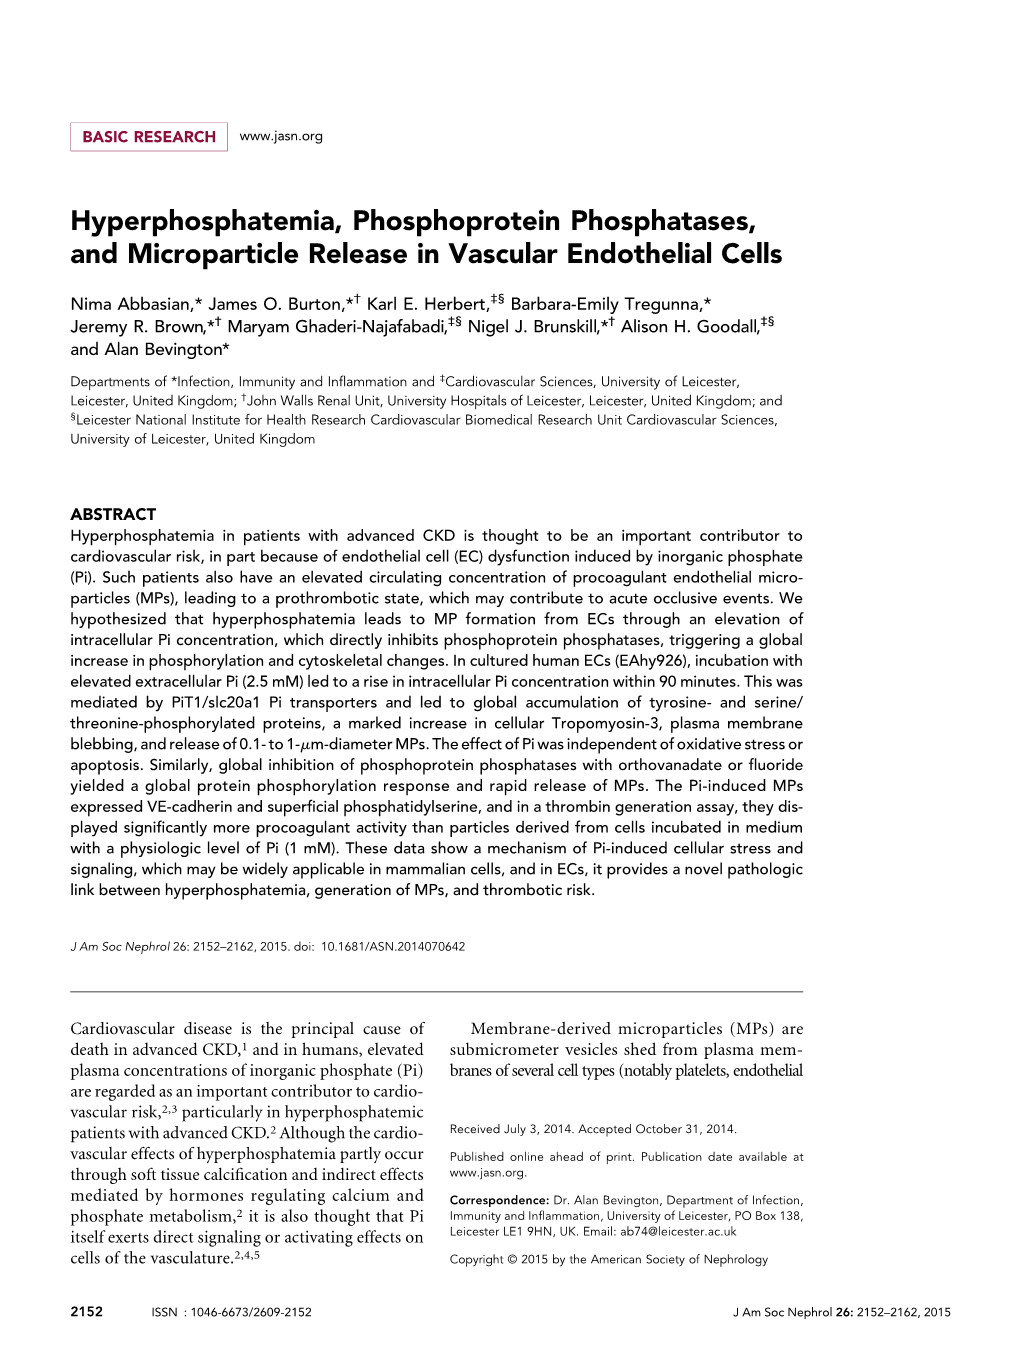 Hyperphosphatemia, Phosphoprotein Phosphatases, and Microparticle Release in Vascular Endothelial Cells